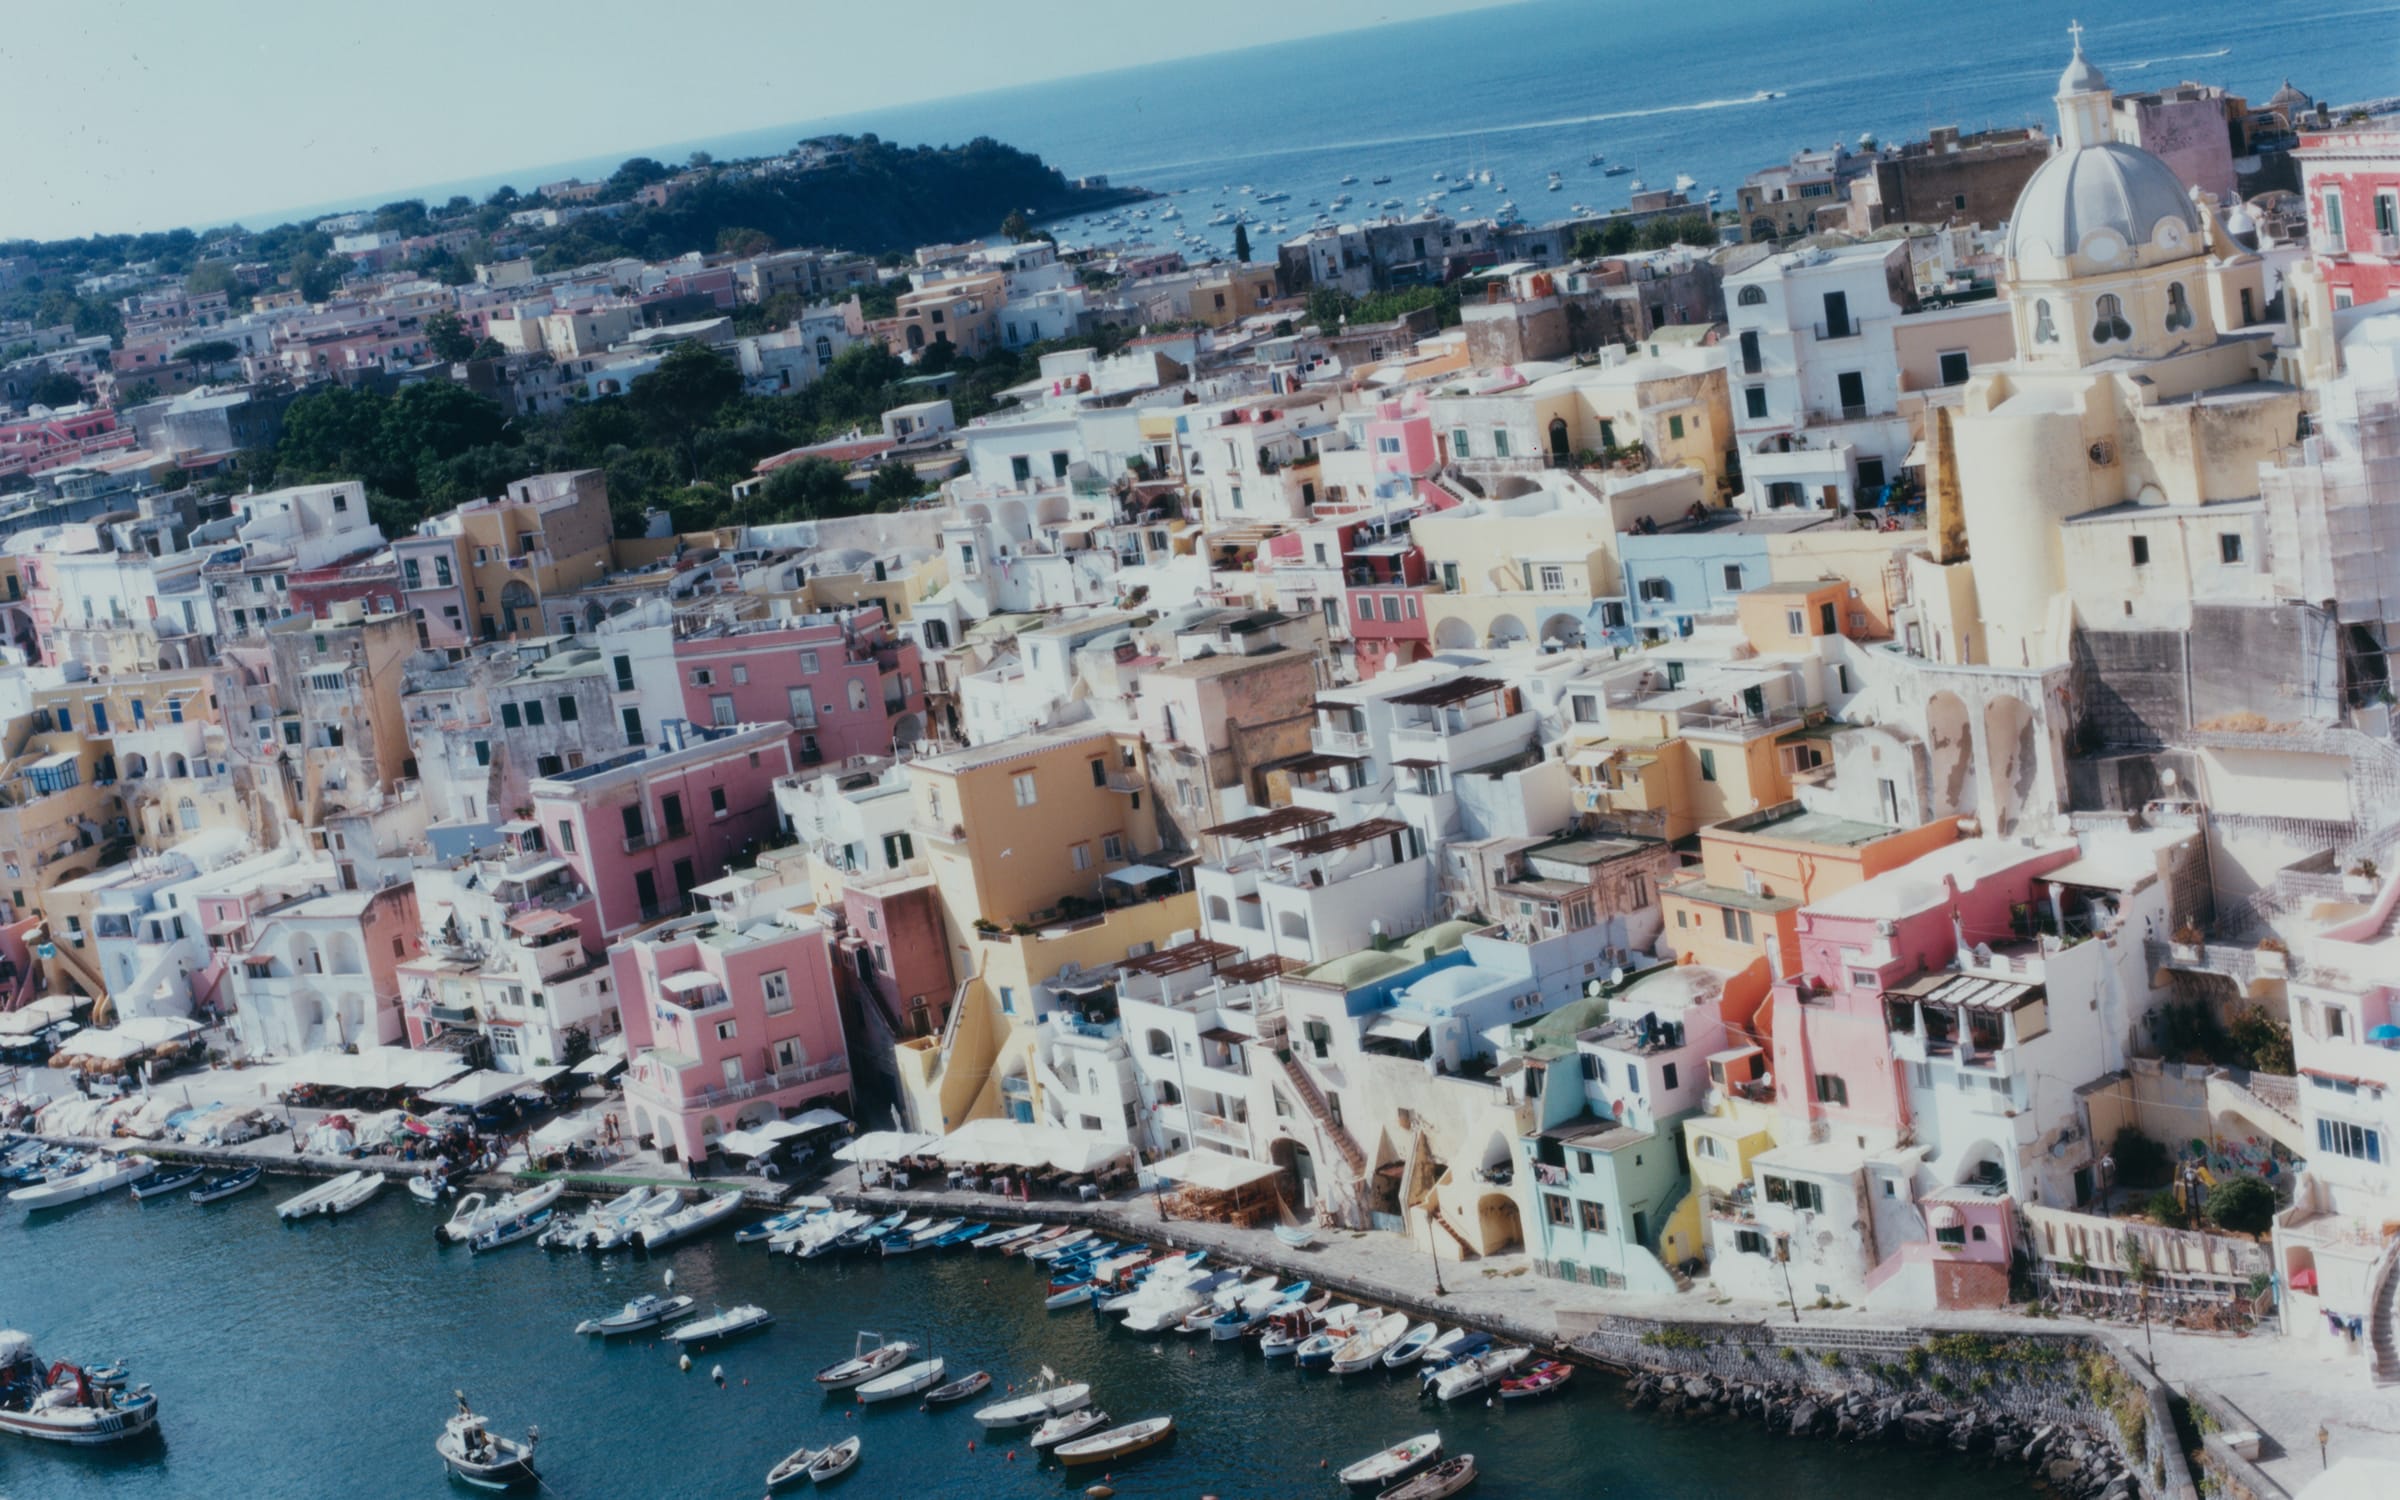 A view of Procida's port. Photo by Louisa Canadas for Art Basel.